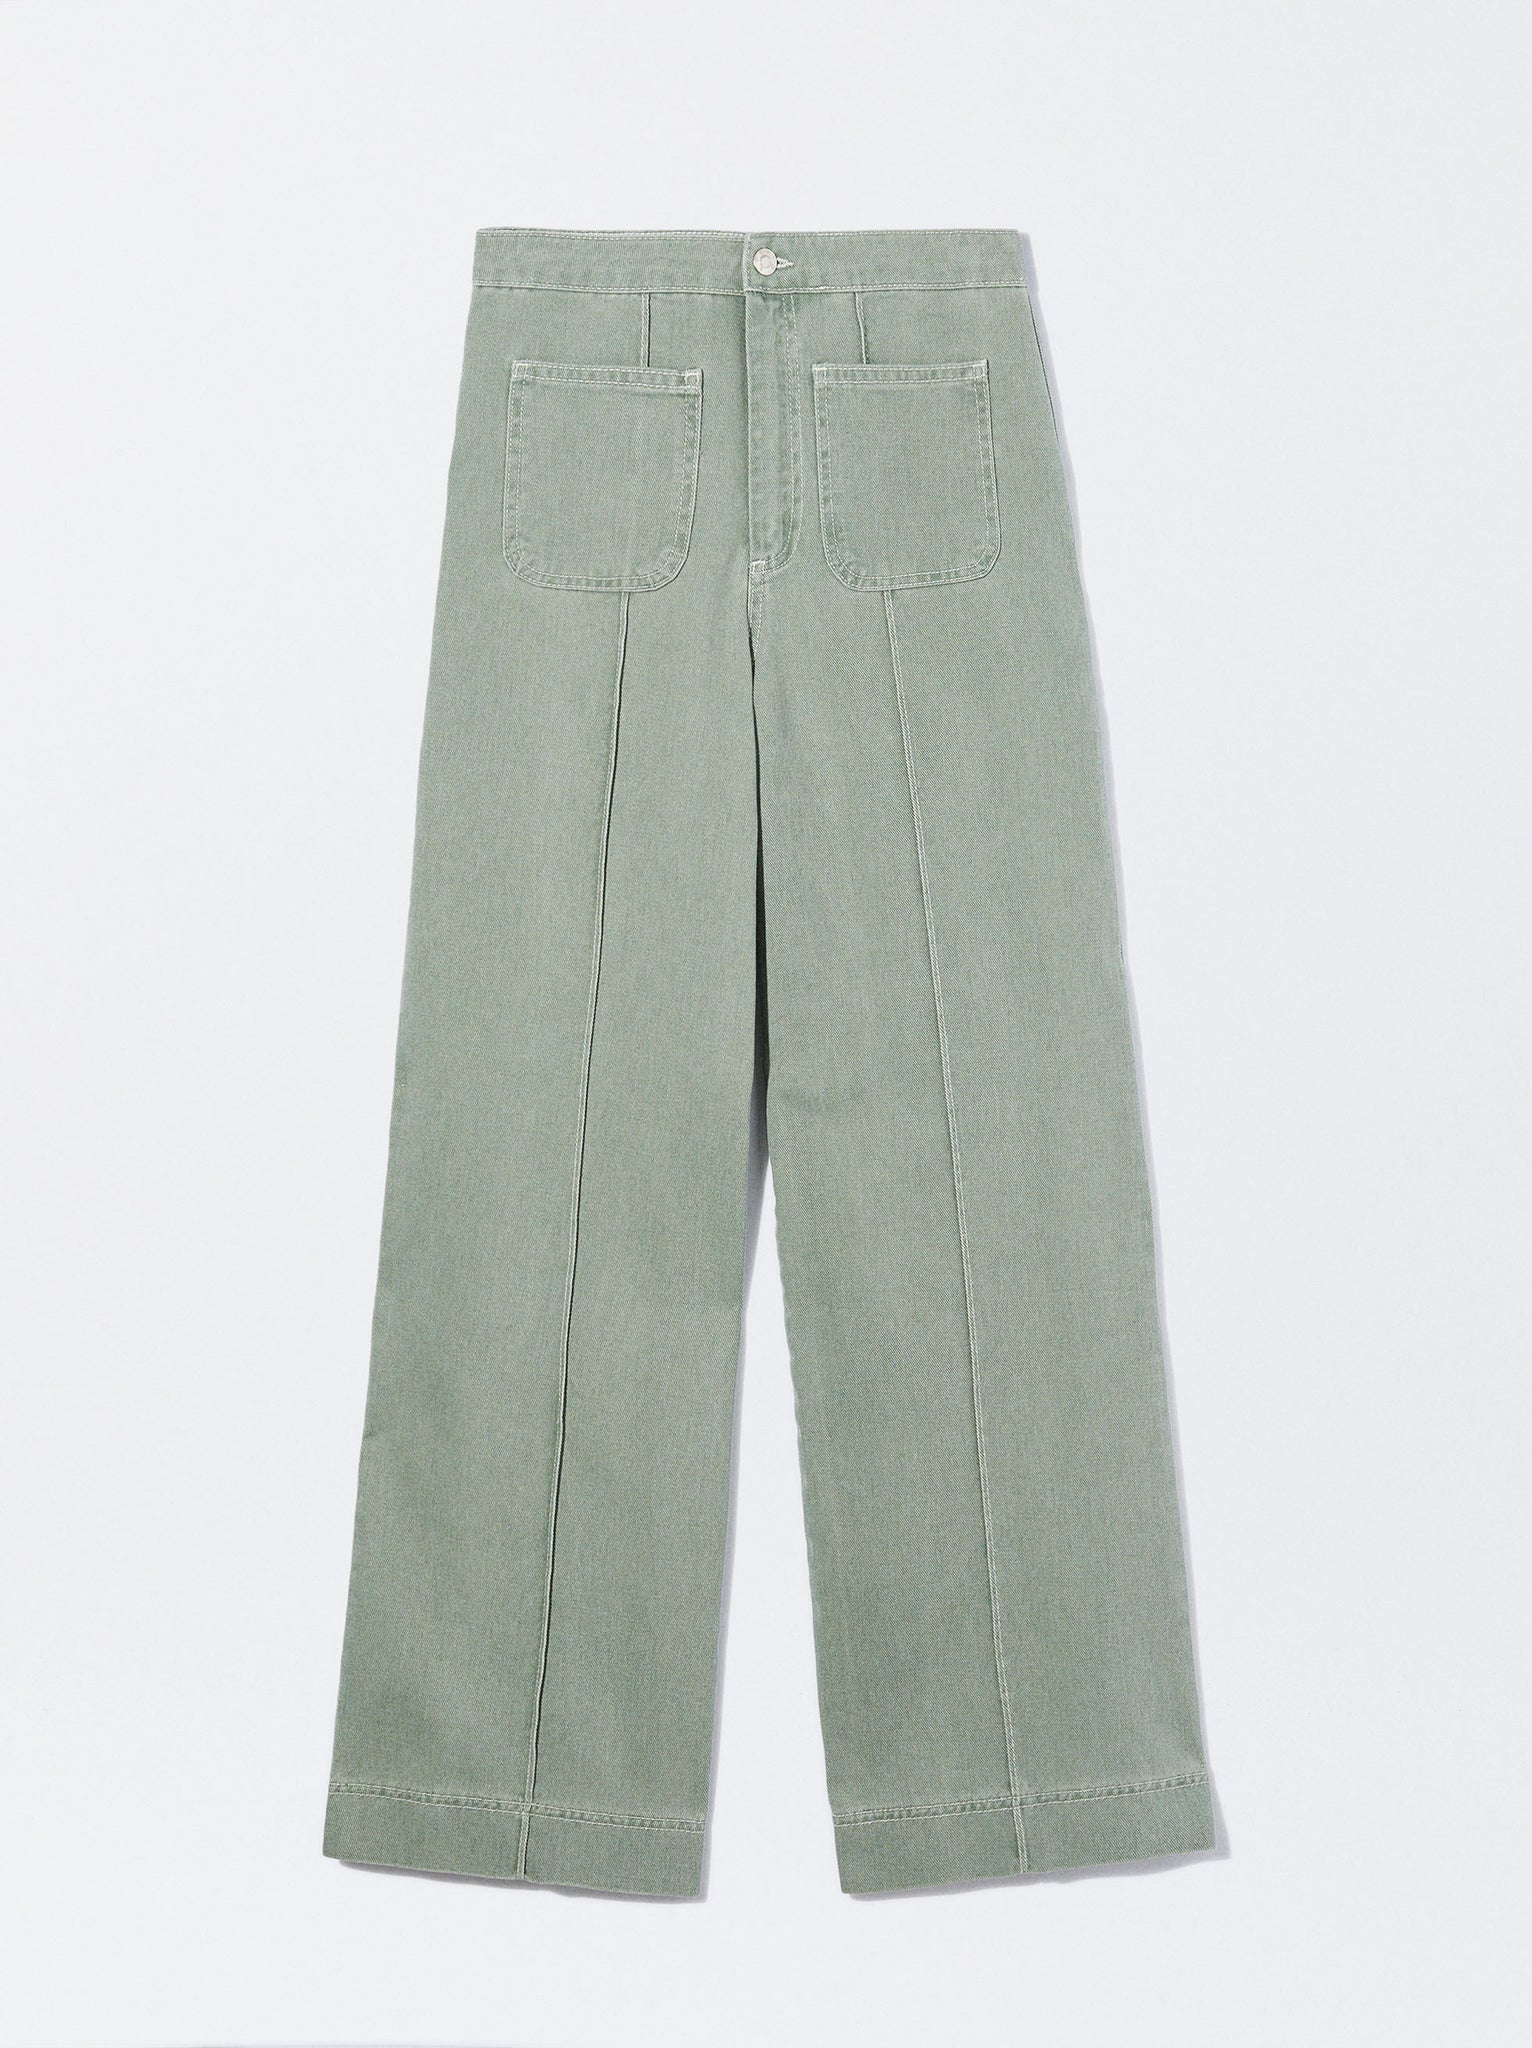 Brixton Trousers